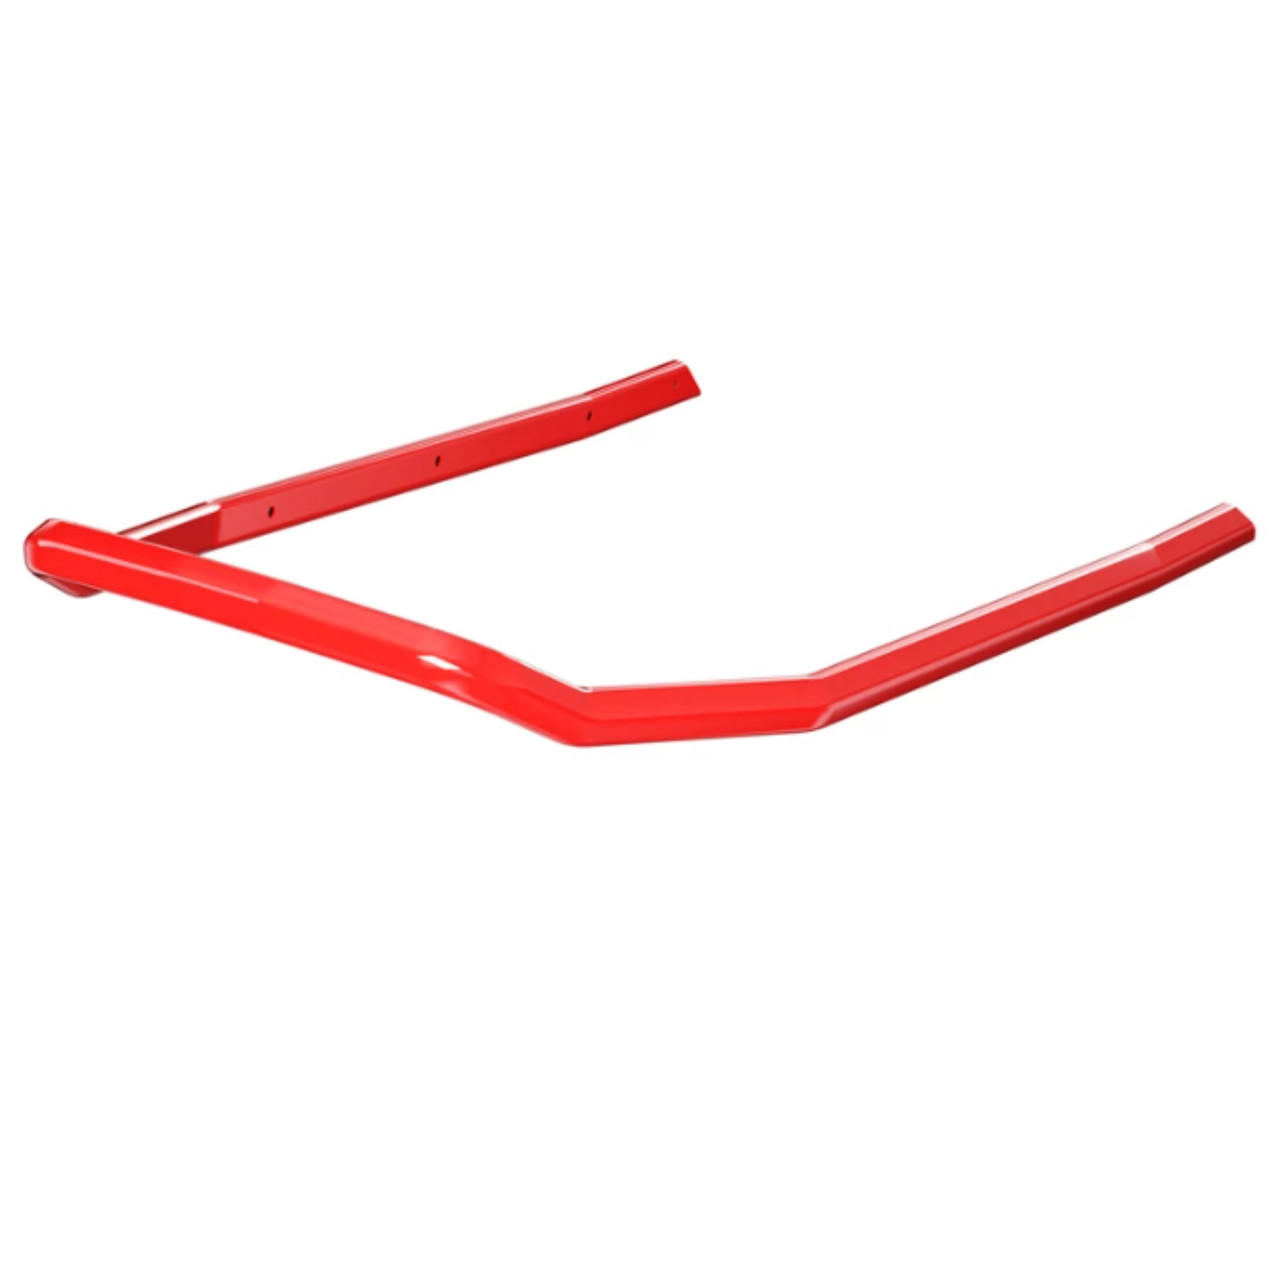 Polaris Snowmobile New OEM Indy Red MATRYX Sentry Mountain Rear Bumper 155 in./164 in. Long, 2889353-293